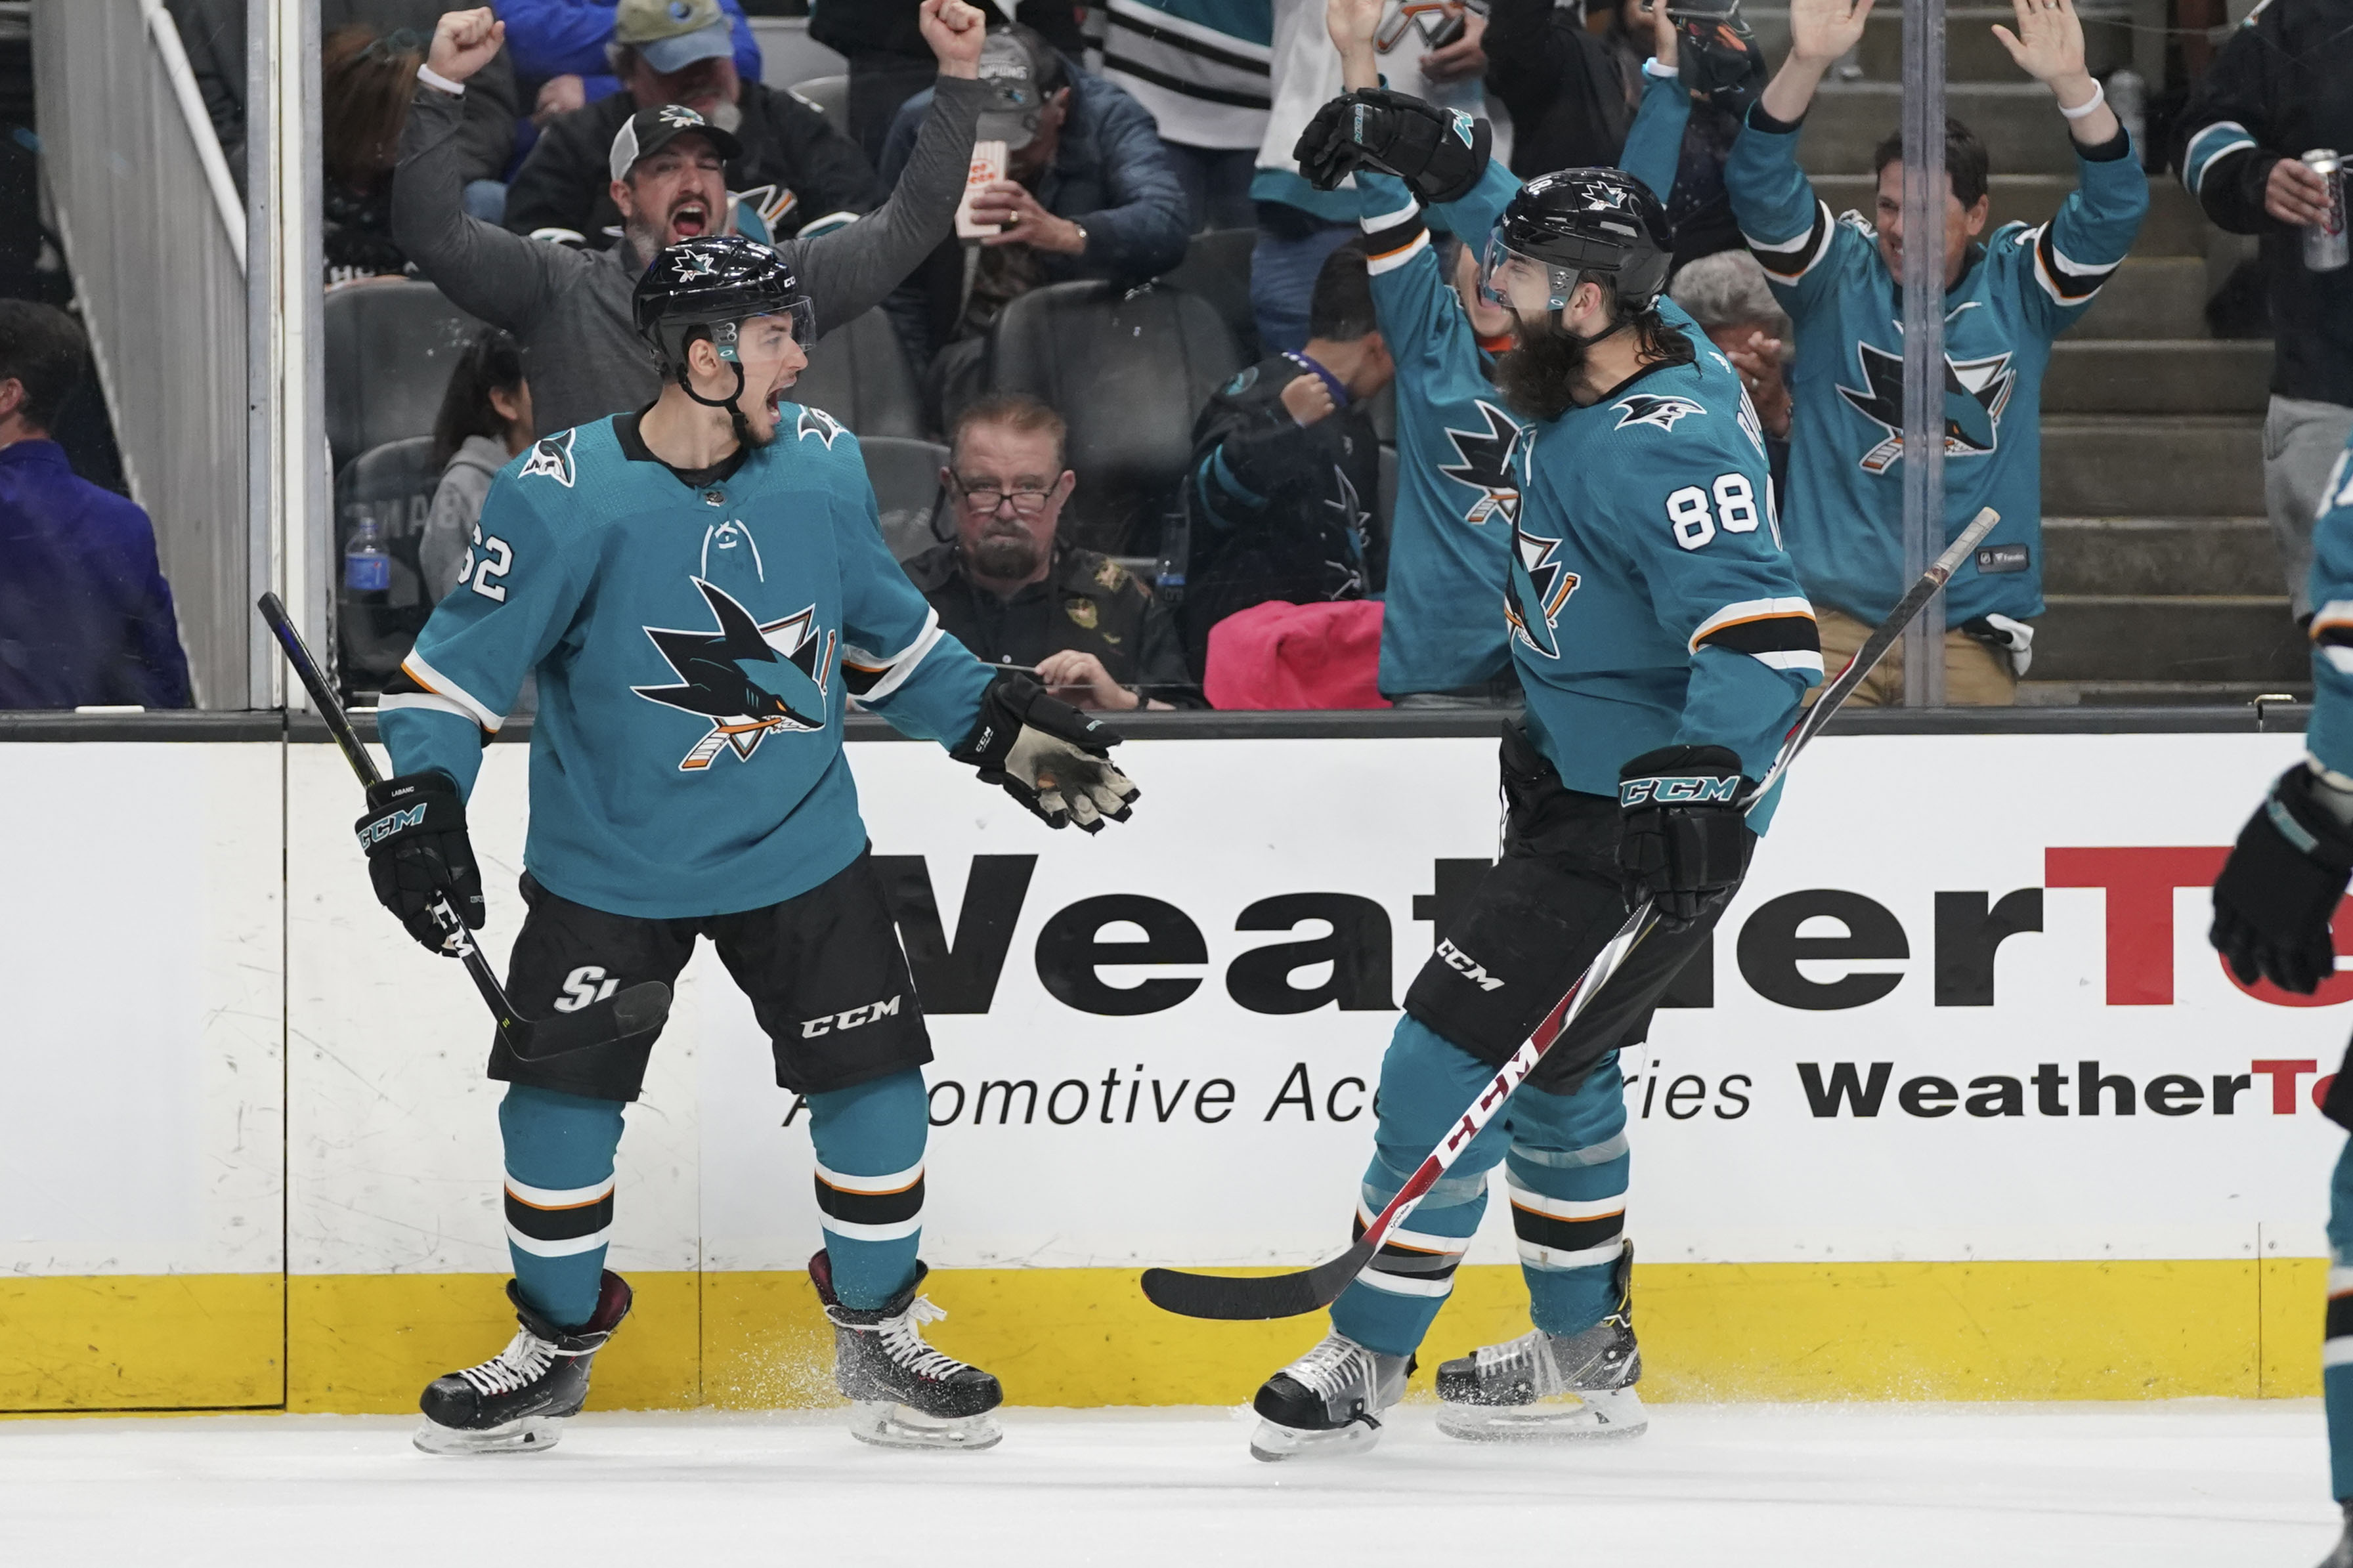 2019-05-12T020351Z_482798167_NOCID_RTRMADP_3_NHL-STANLEY-CUP-PLAYOFFS-ST-LOUIS-BLUES-AT-SAN-JOSE-SHARKS